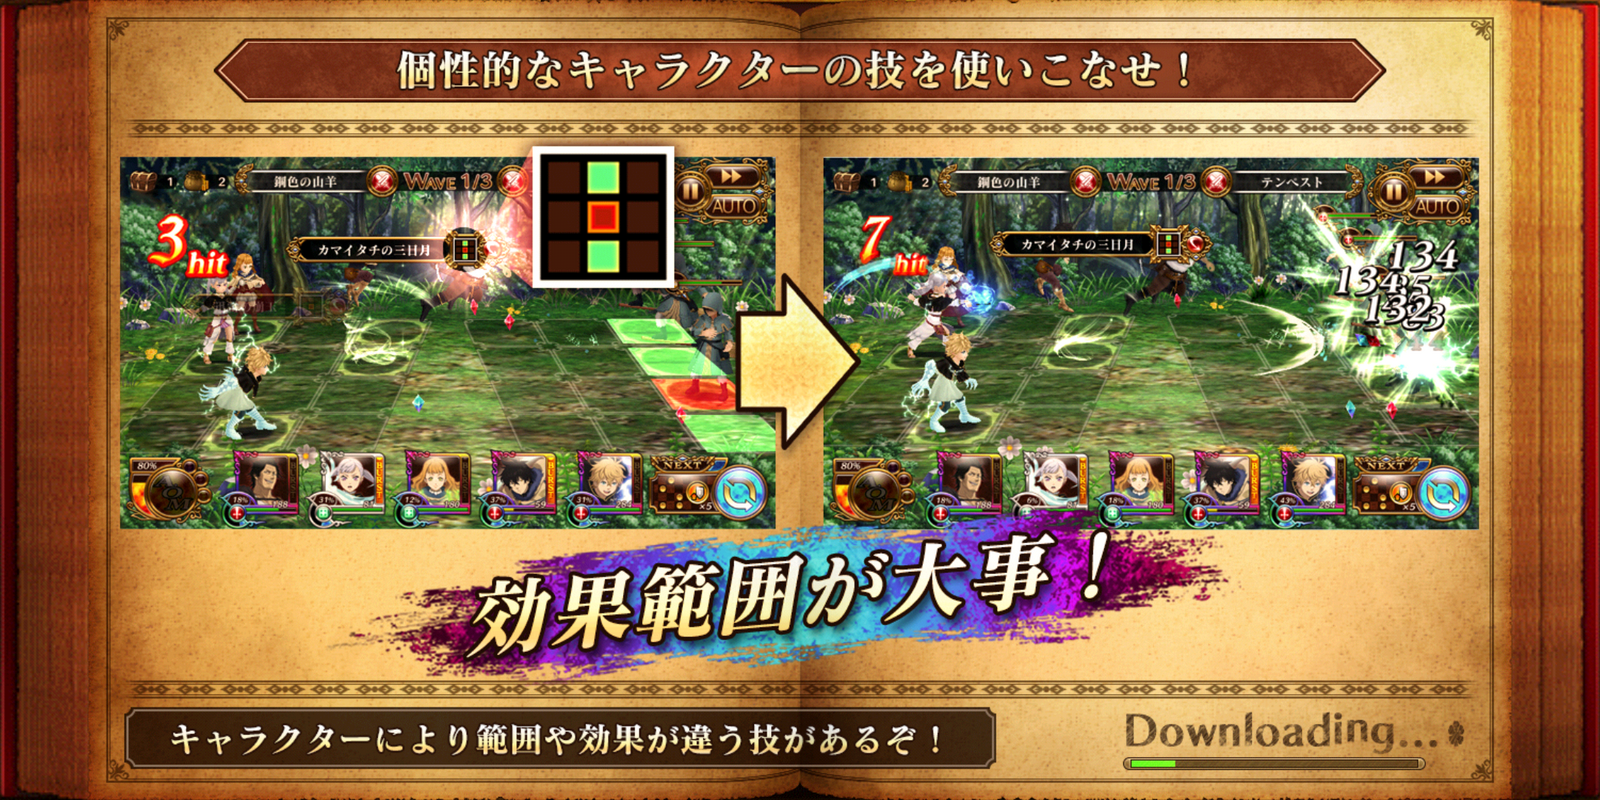 Black Clover: Infinite Knights (JP) 1.5.4 APK for Android Screenshot 2